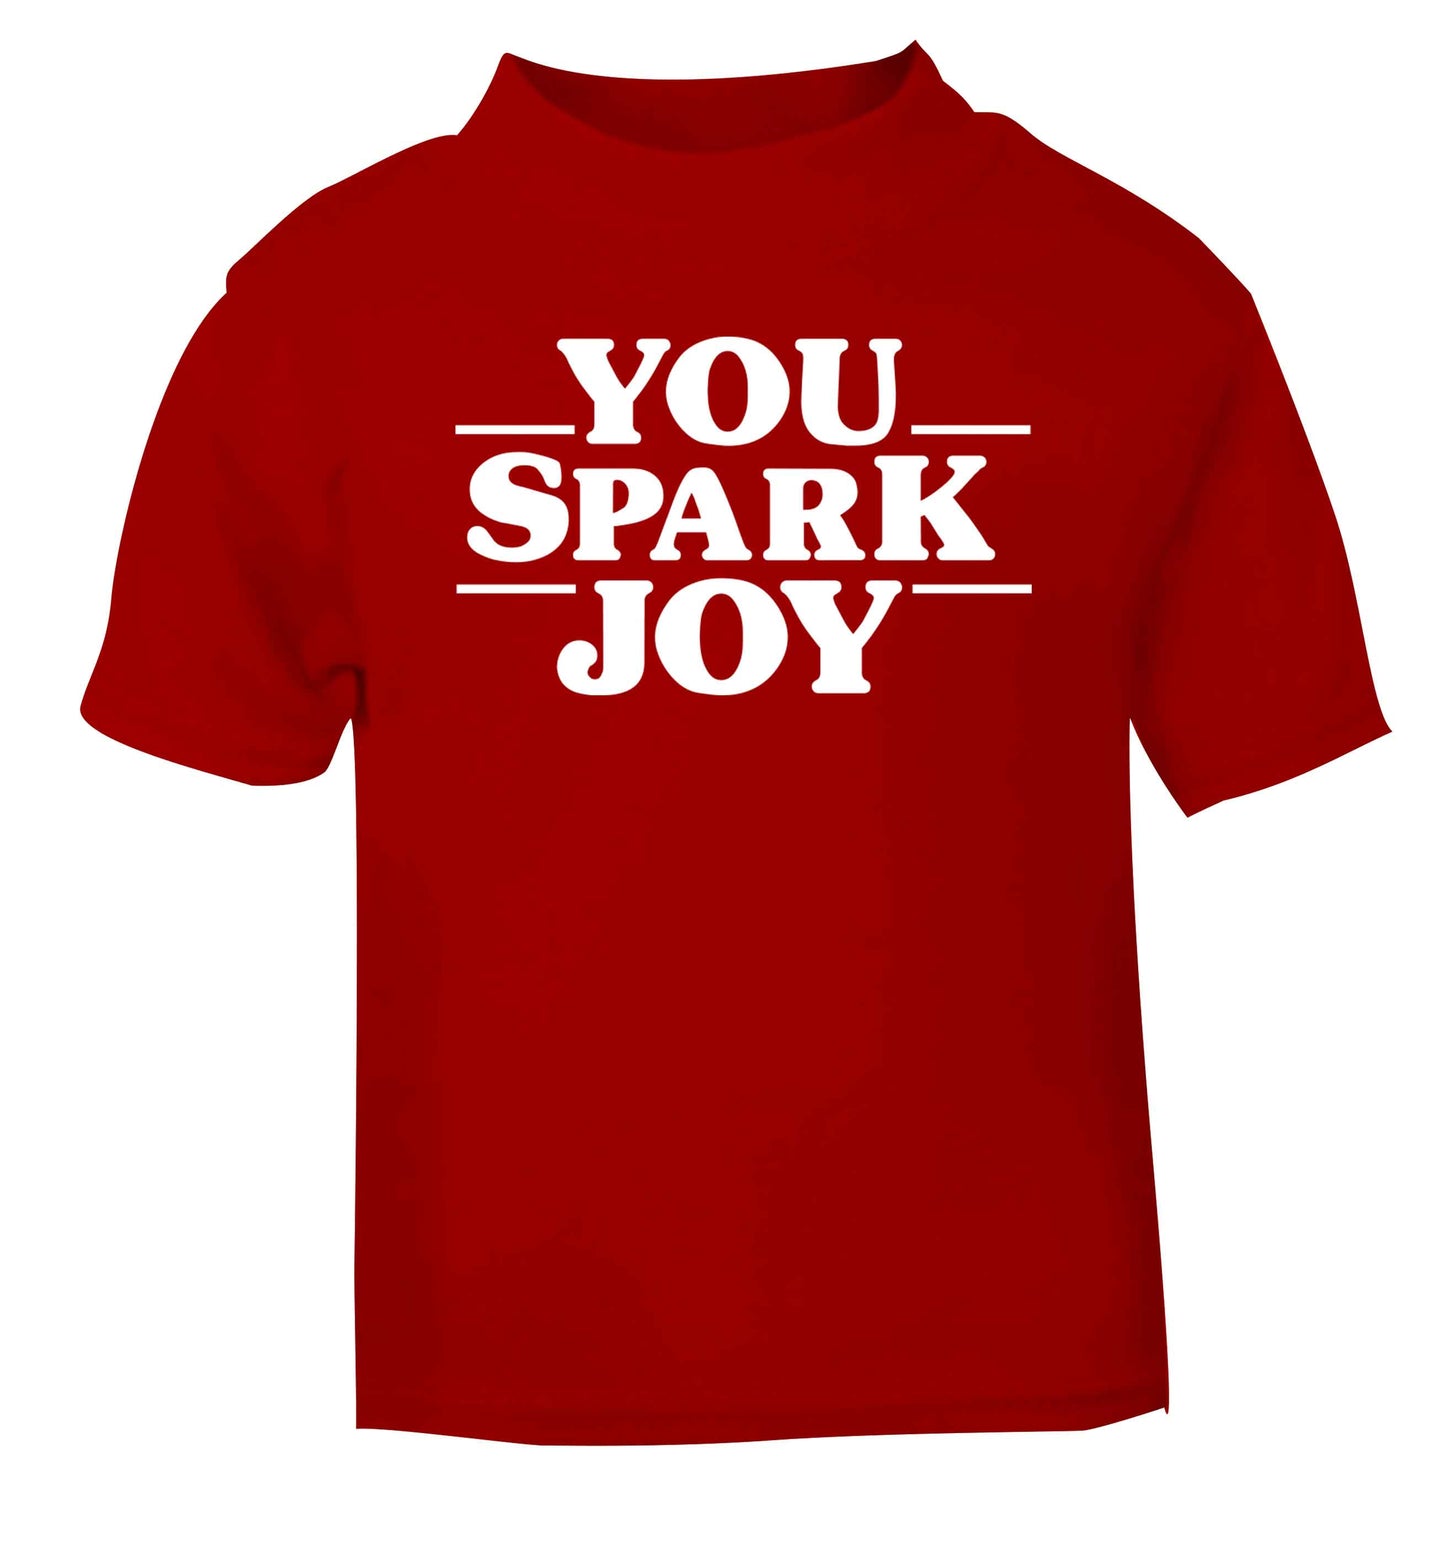 You spark joy red baby toddler Tshirt 2 Years